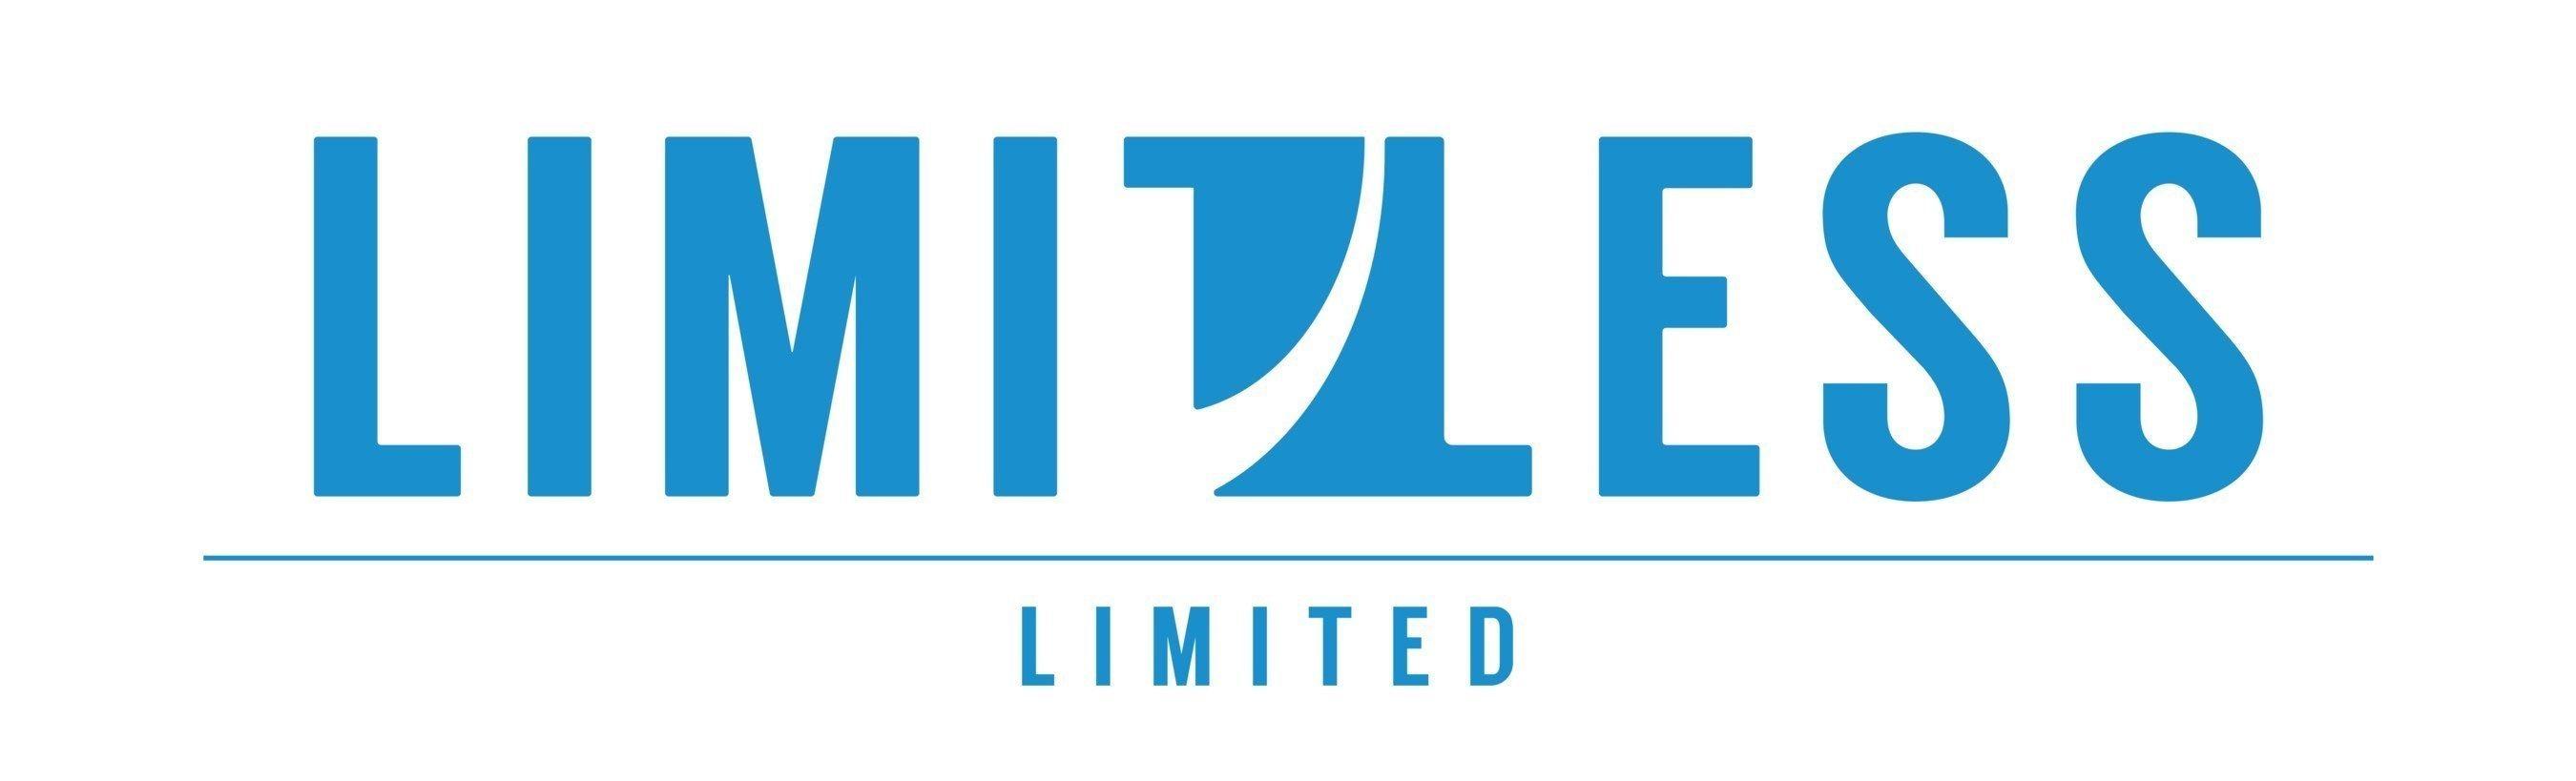 Blue Round Popular Company Logo - VR Company Limitless, LTD. Secures Seed Round Funding from Top